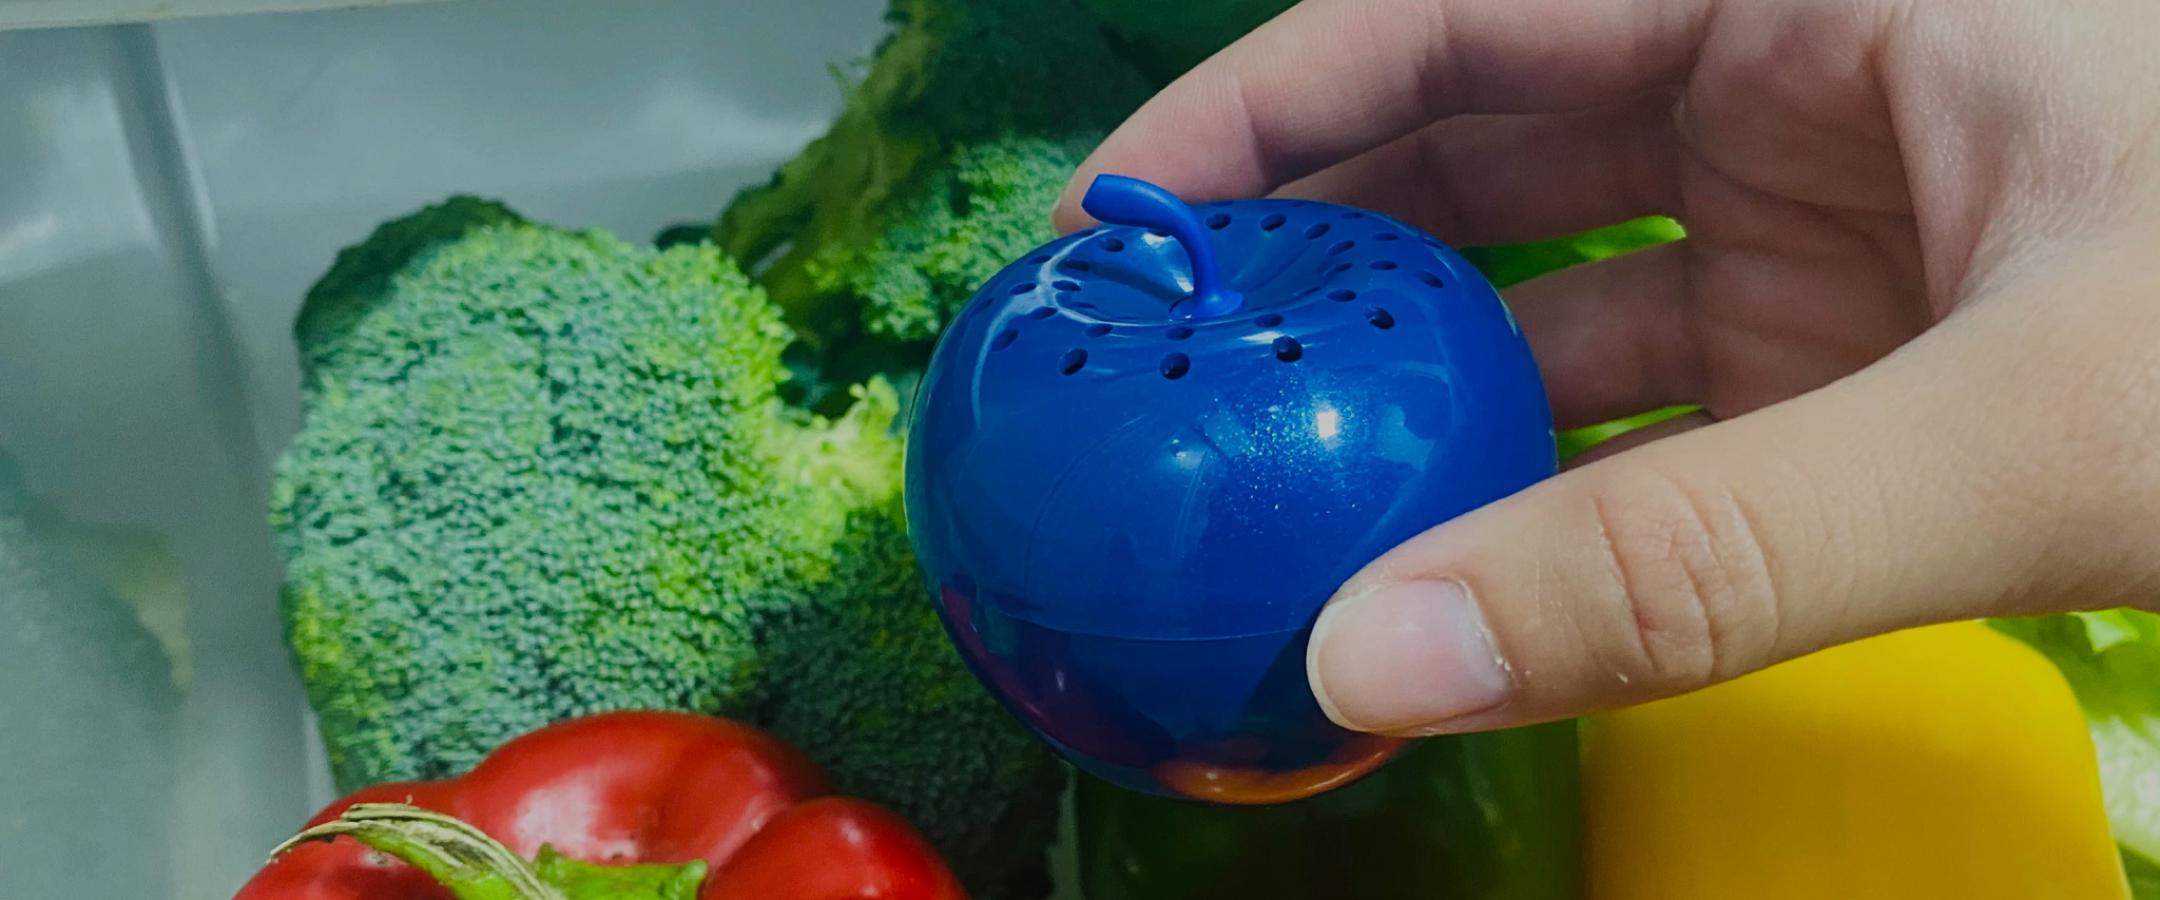 Bluapple Produce Freshness Saver Balls Extend The Life Of Fruits